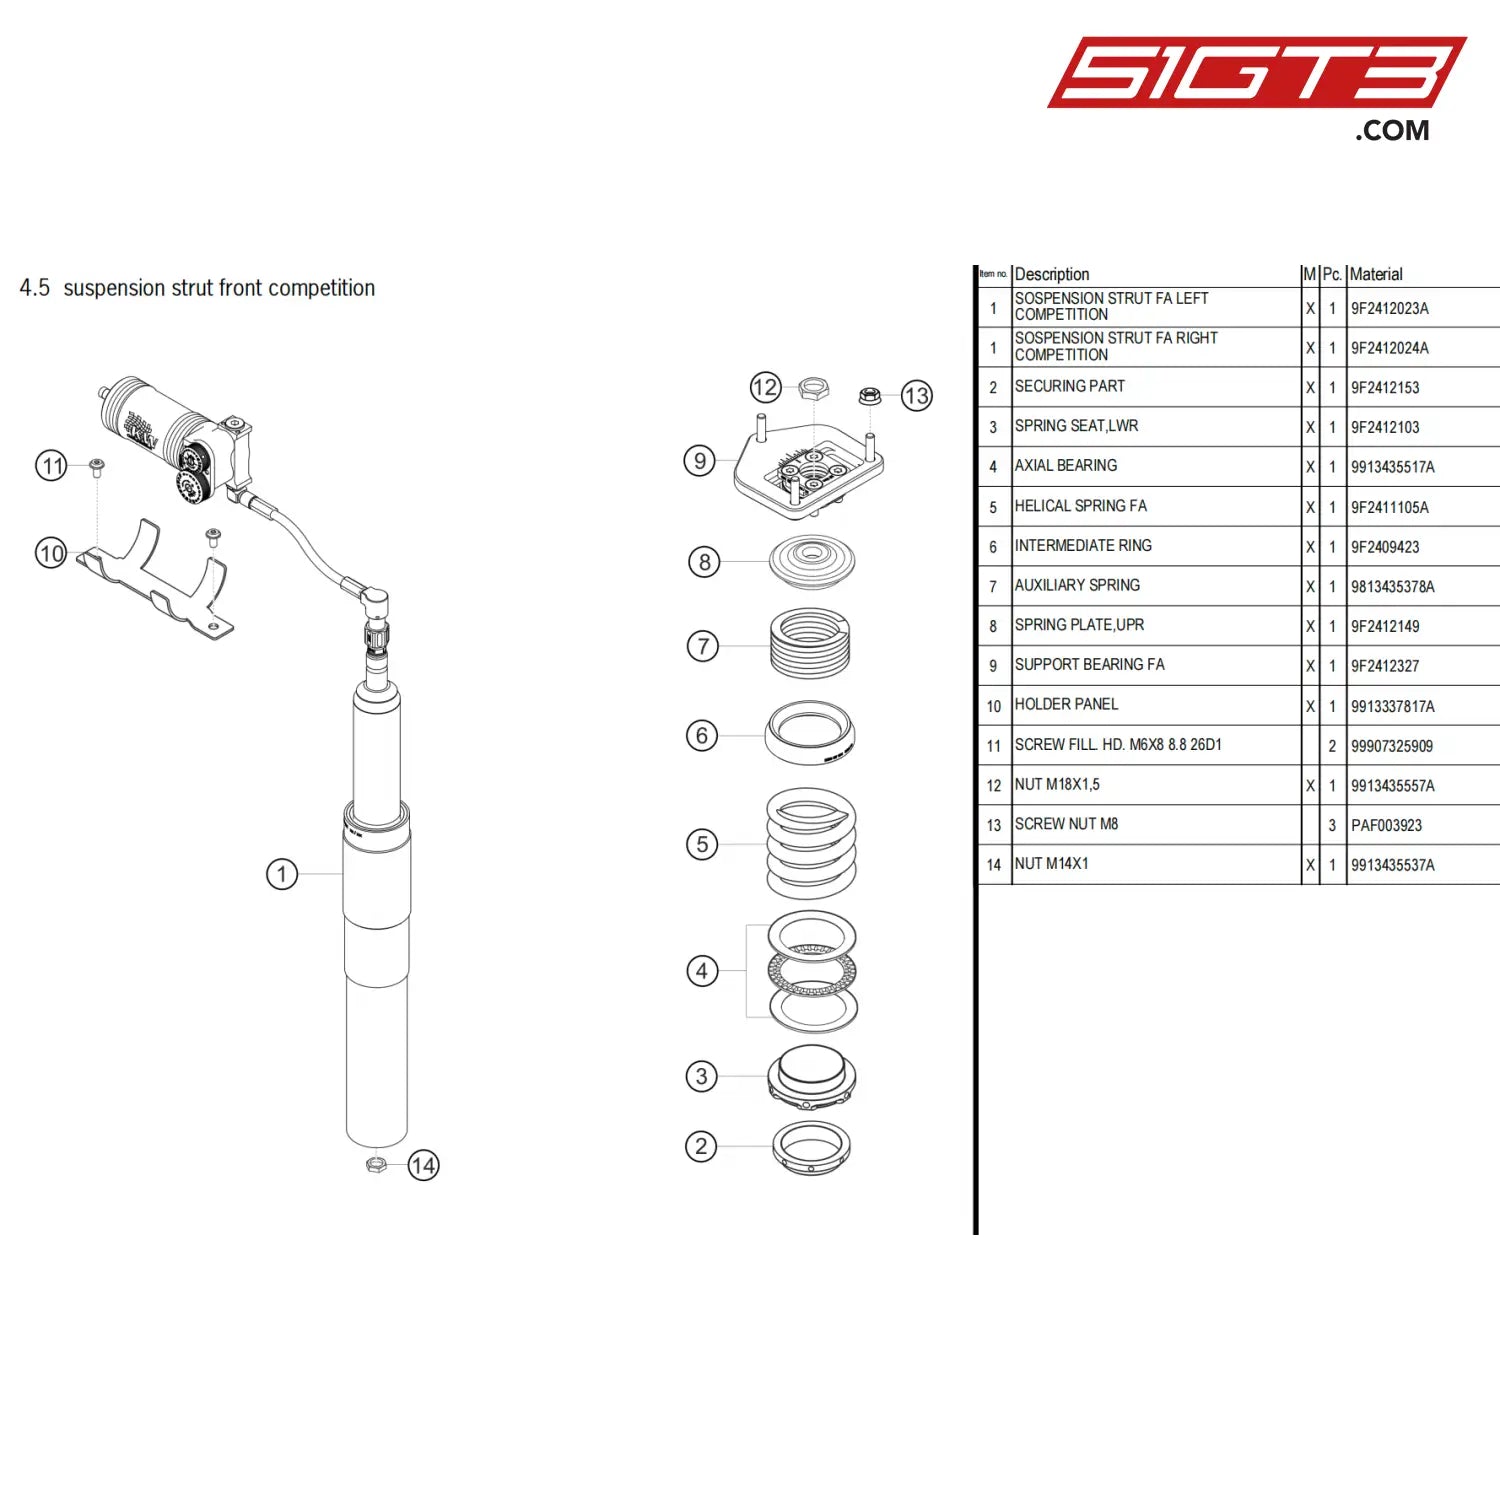 Spring Plate Upr - 9F2412149 [Porsche 718 Cayman Gt4 Clubsport] Suspension Strut Front Competition